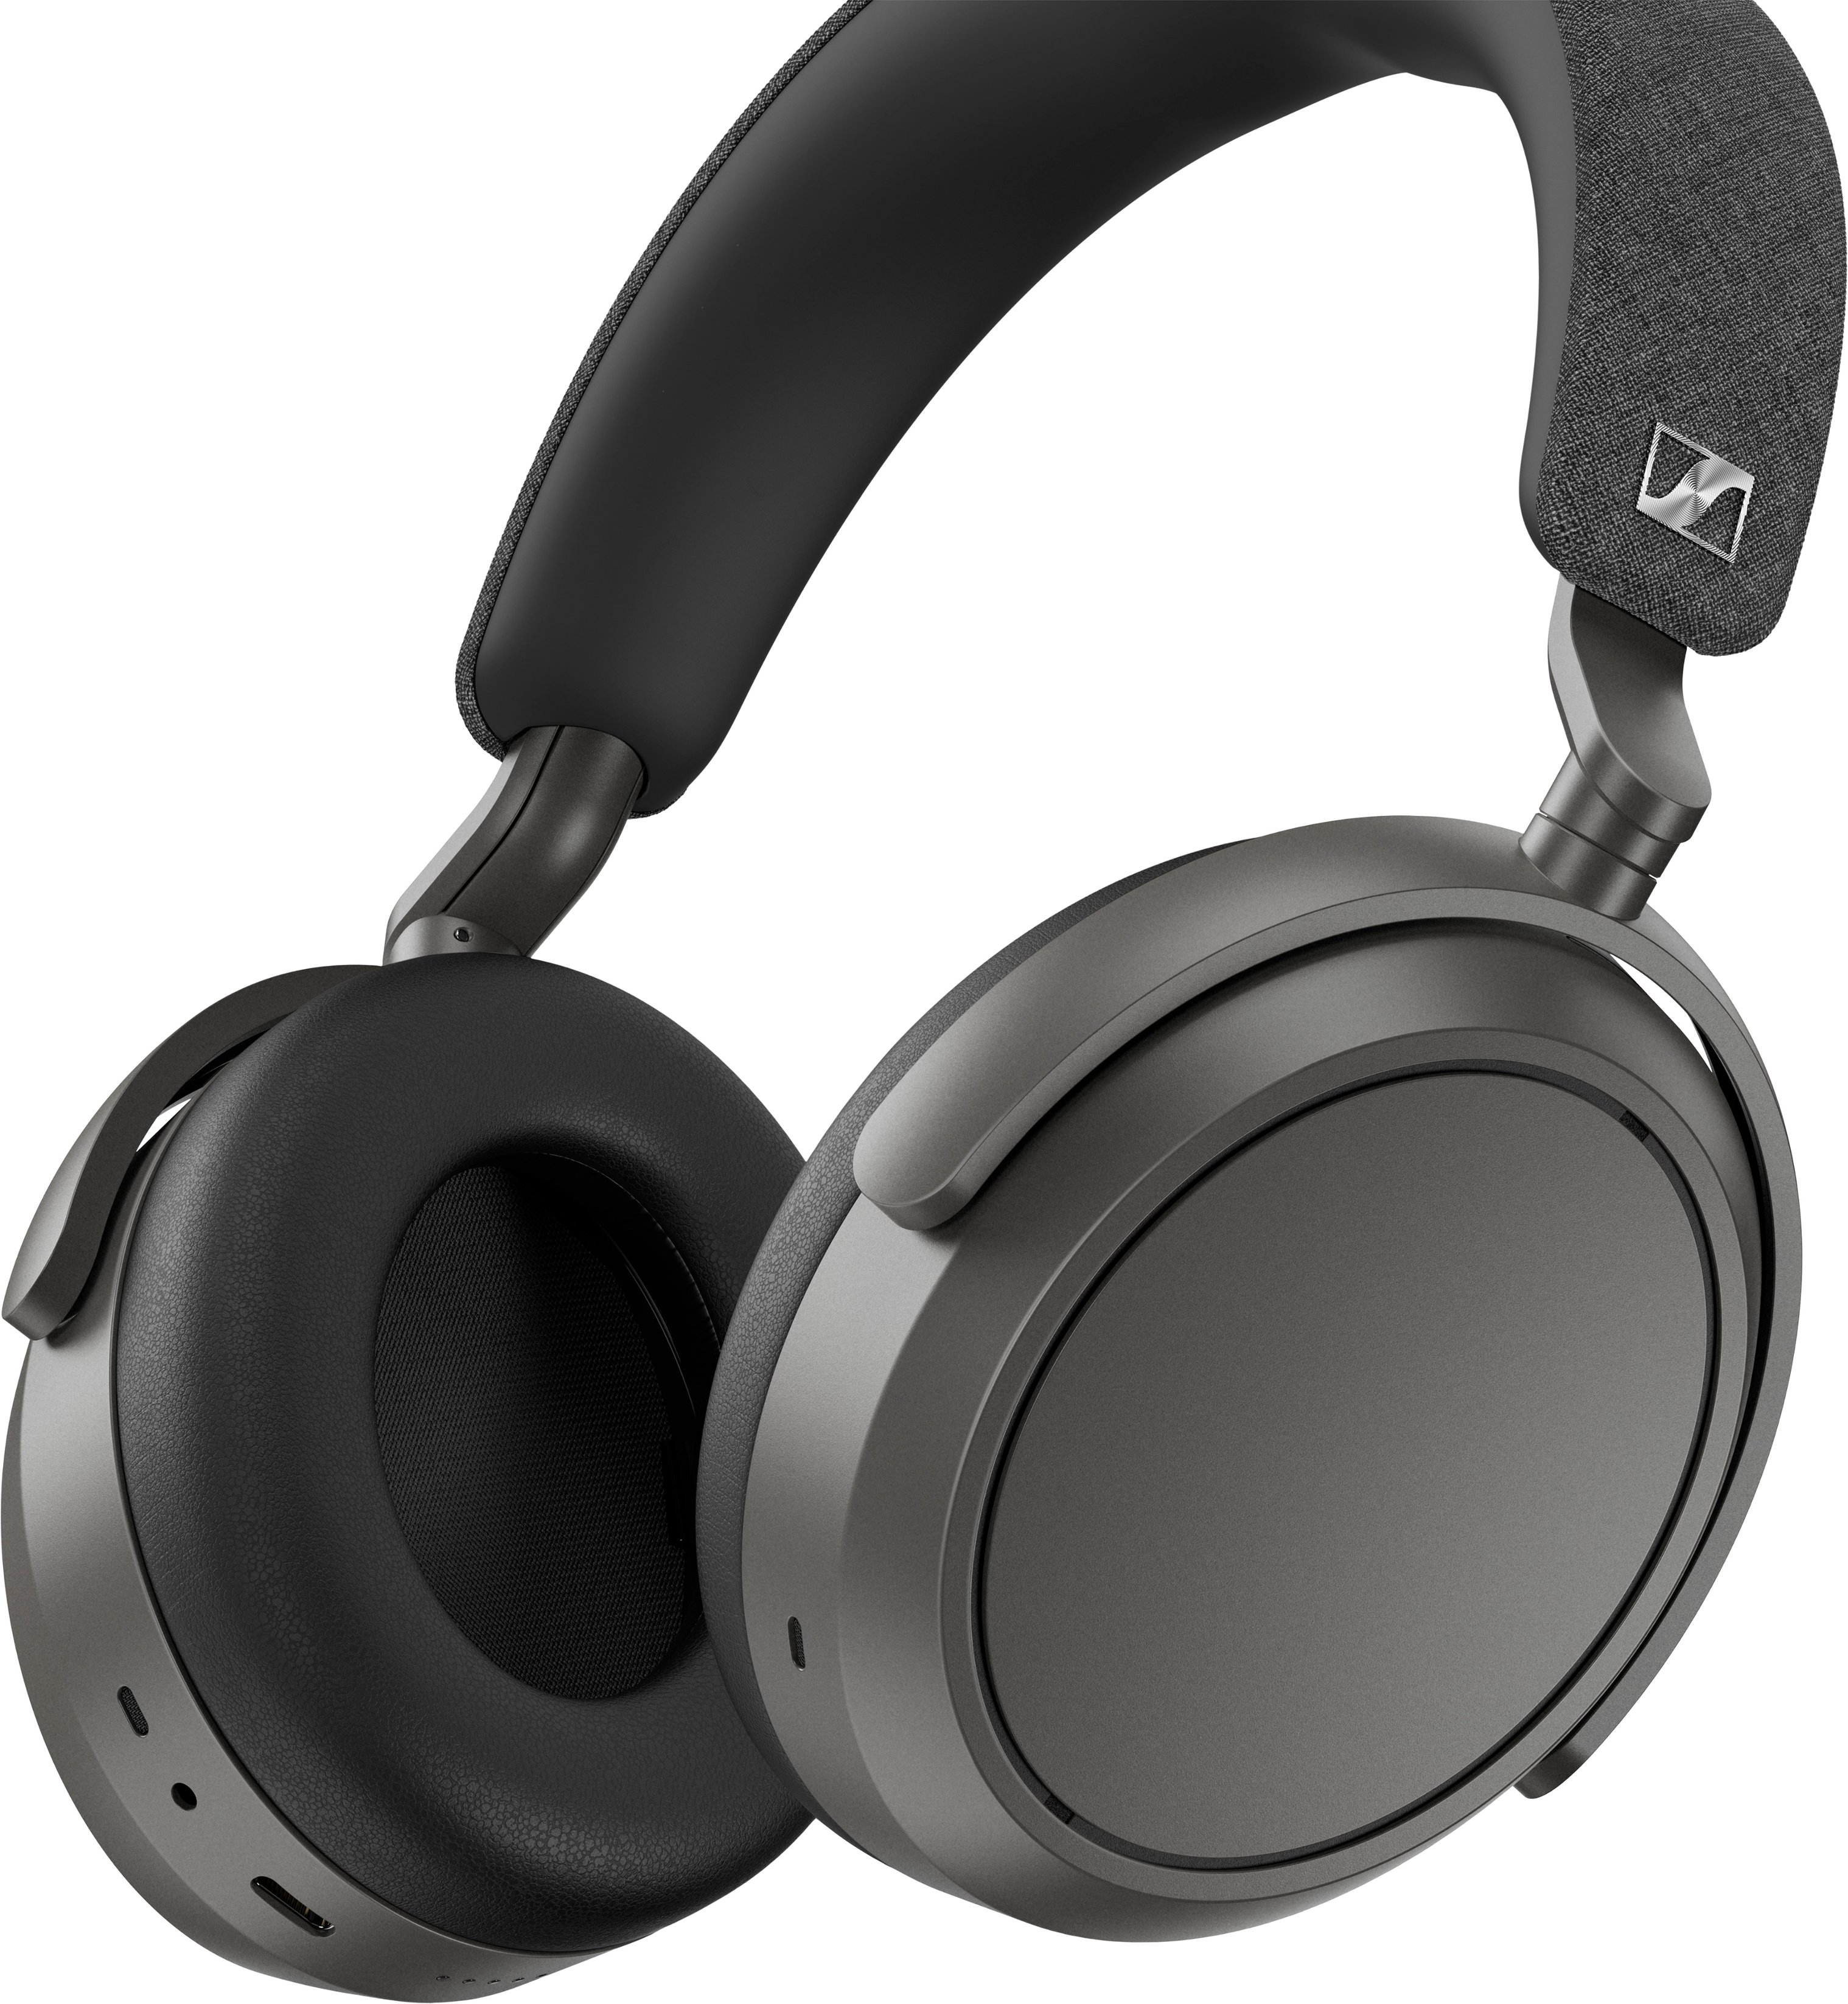 Sennheiser MOMENTUM 4 Wireless  Headphone Reviews and Discussion 